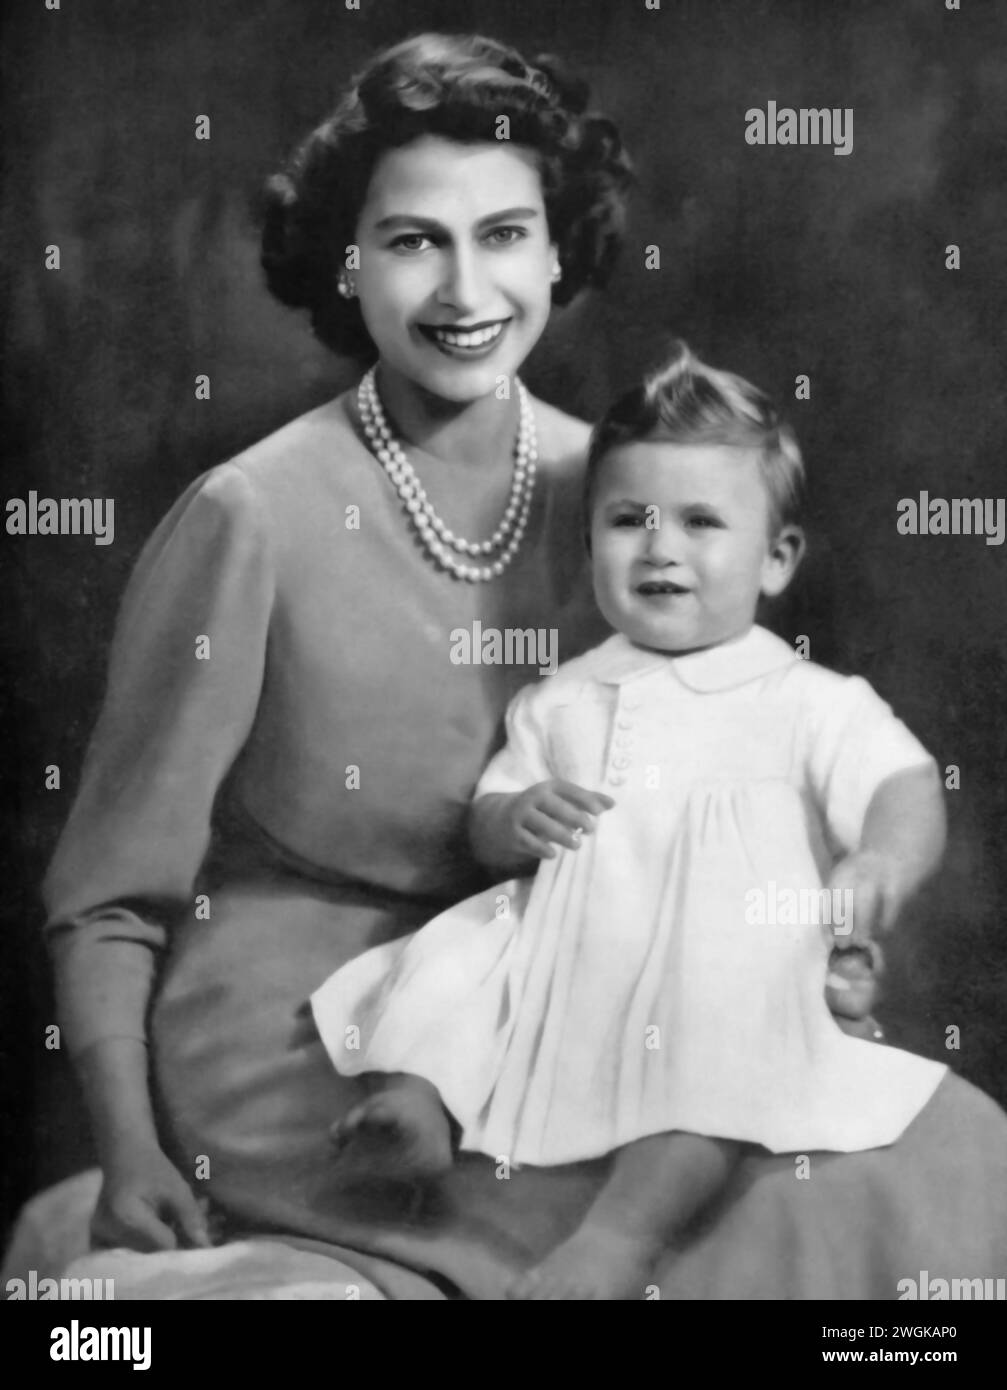 Portrait of Elizabeth II holding her son, Charles III, in the early 1950s. Before her ascension to the throne in 1952, Elizabeth is seen here with Charles, born November 14, 1948. This photo captures a tender moment between the future queen and the young prince, who would become King Charles III in 2022, highlighting their early bond in the royal family. Stock Photo